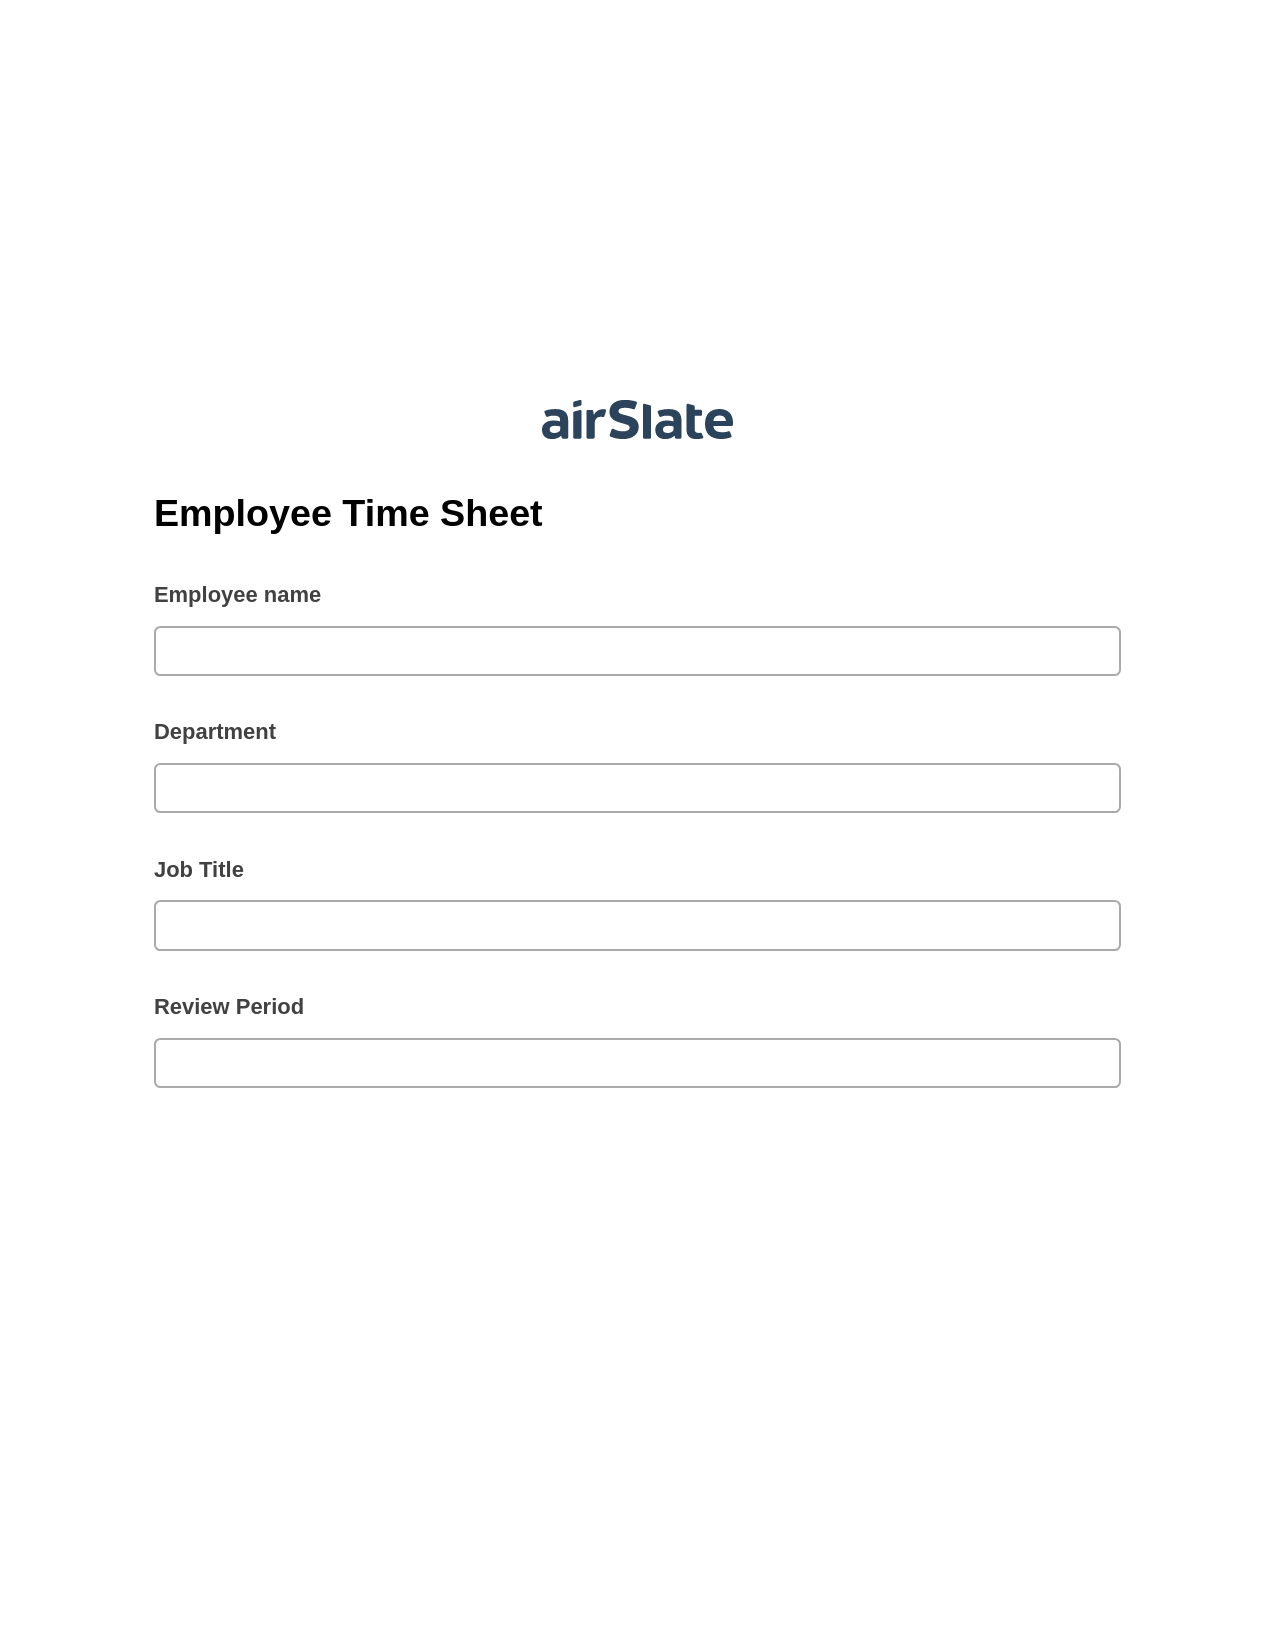 Employee Time Sheet Pre-fill from Salesforce Records Bot, Update Audit Trail Bot, Export to WebMerge Bot